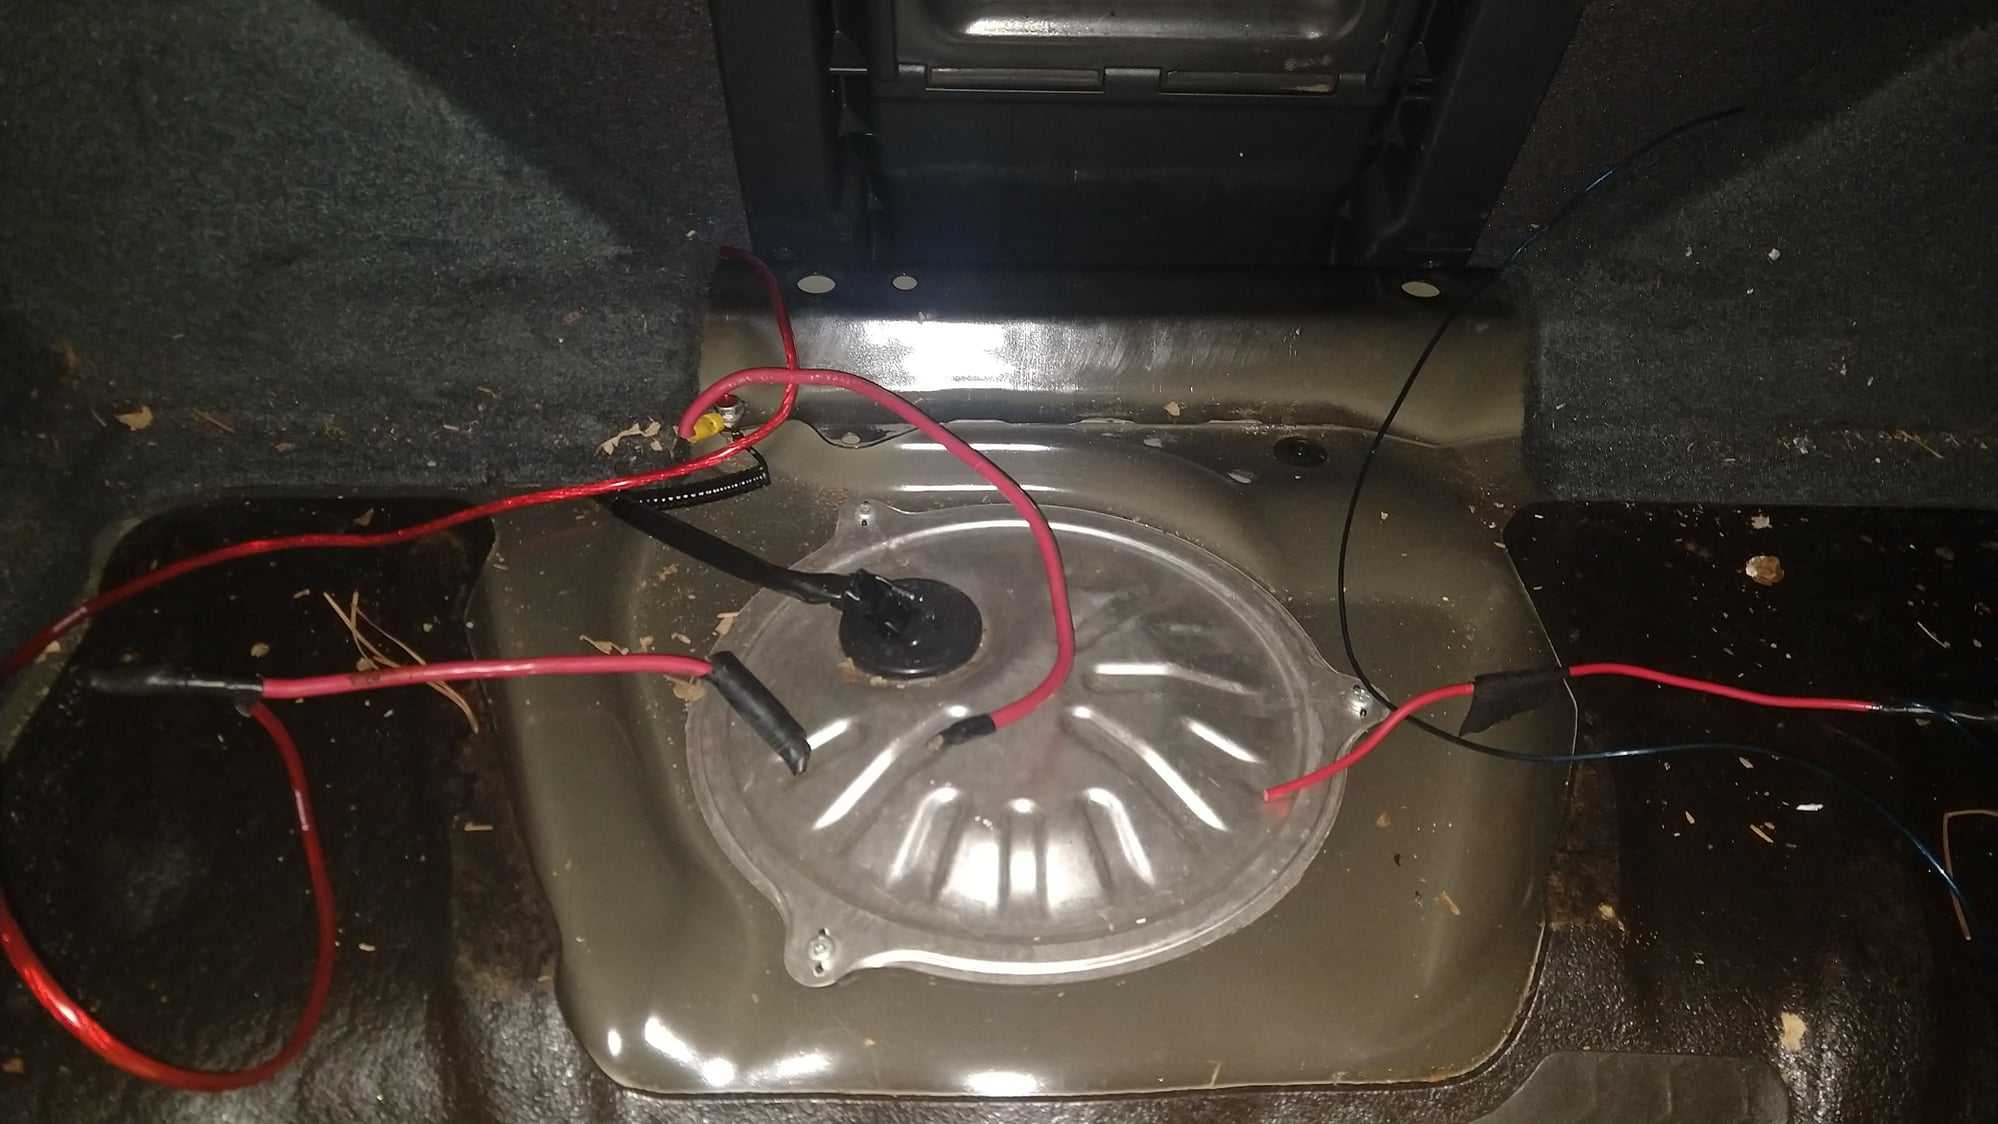 Subwoofer of Acura TL 2006, doesn't have the connector - AcuraZine